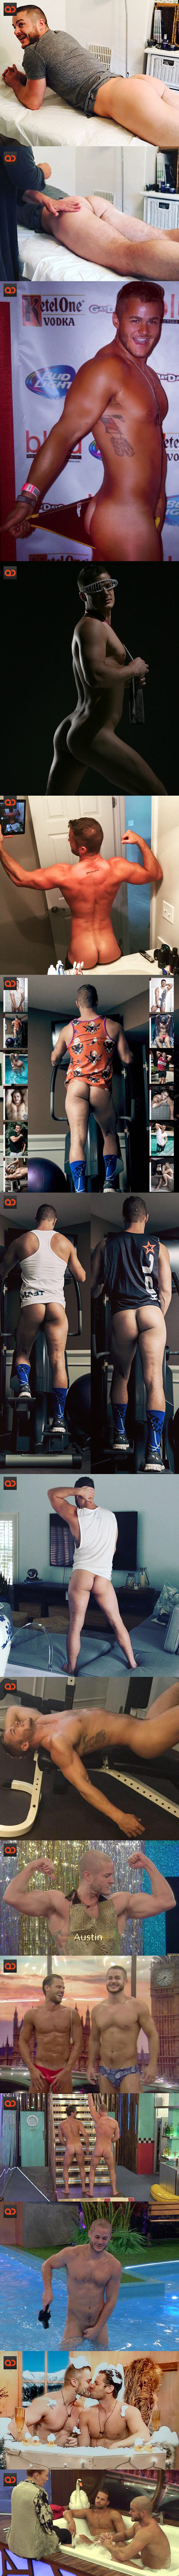 Austin Armacost Tries Some Naked Yoga, Exposes His Peachy Butt Again!